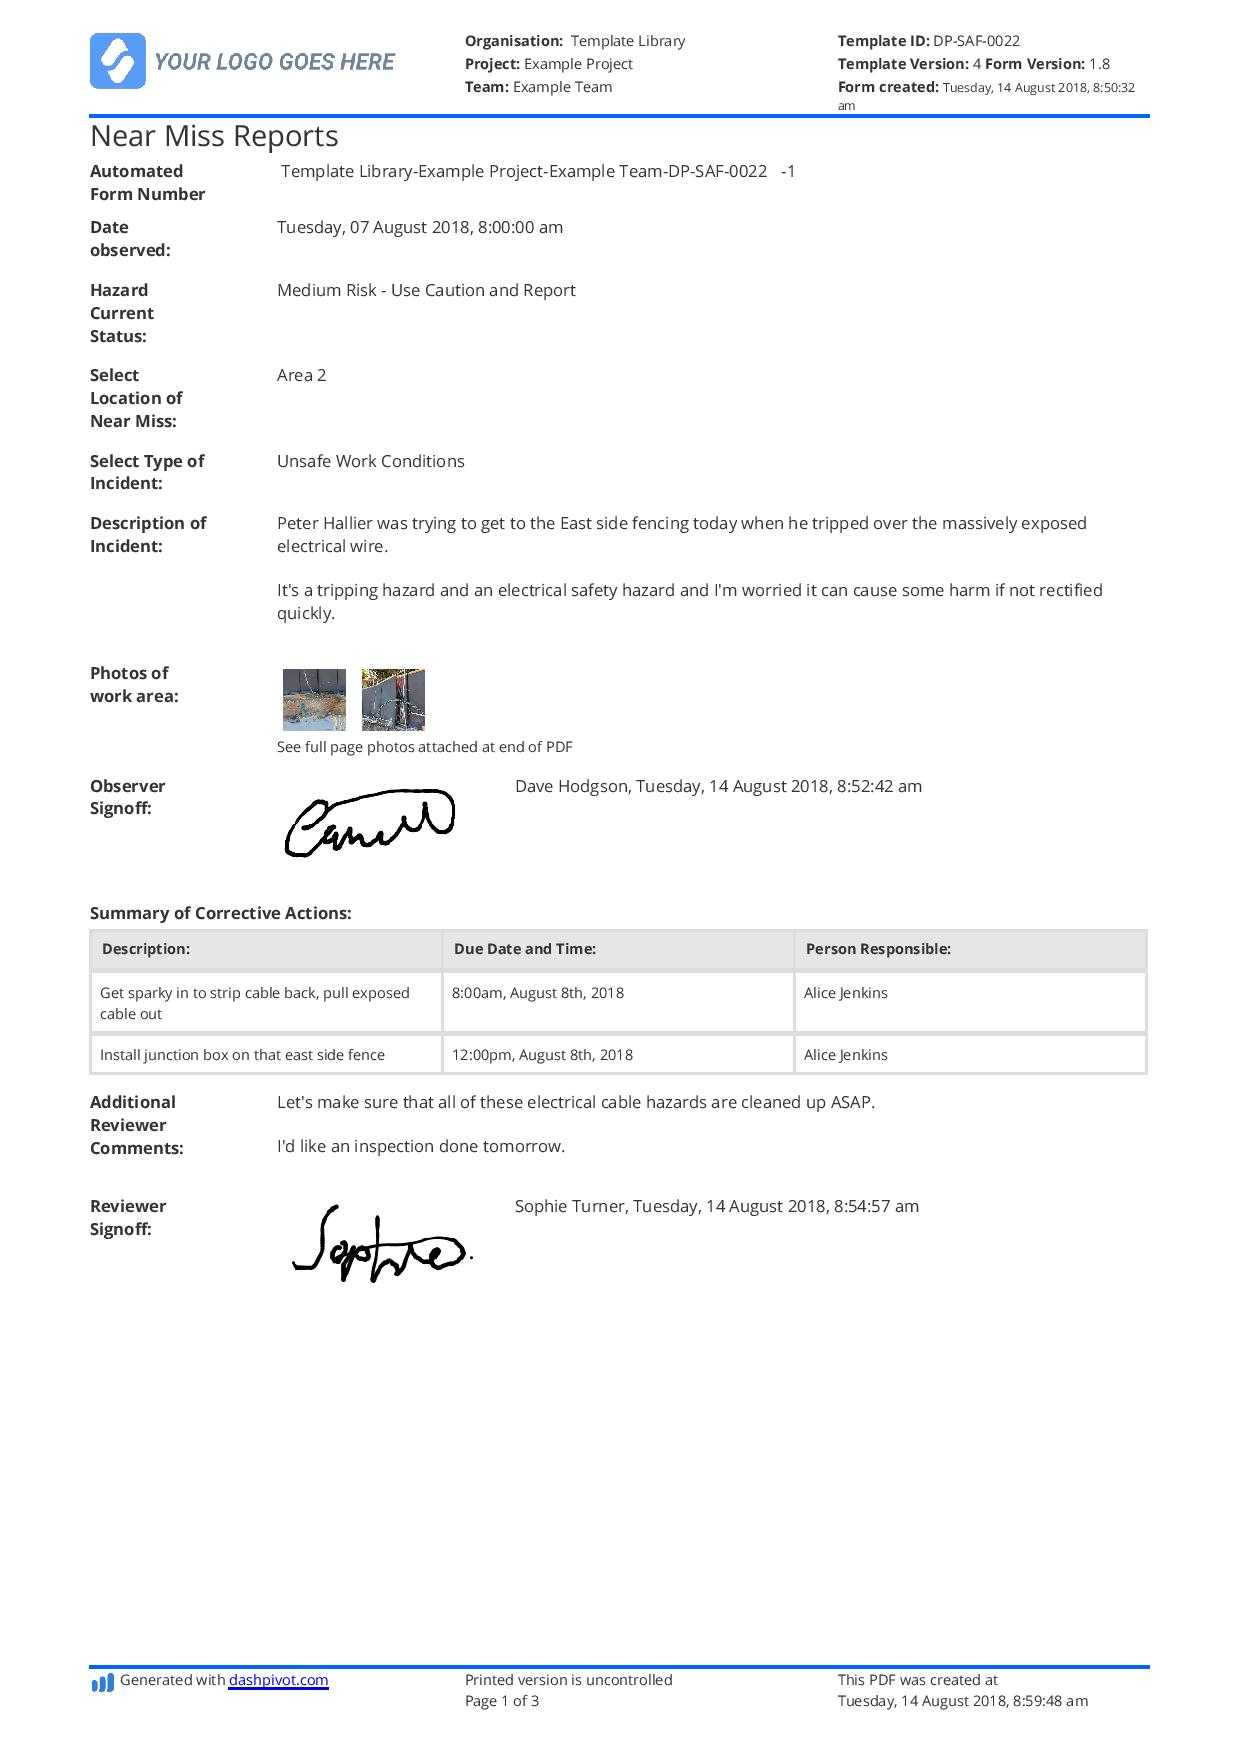 Free Near Miss Reporting Template (Easily Customisable) With Hazard Incident Report Form Template